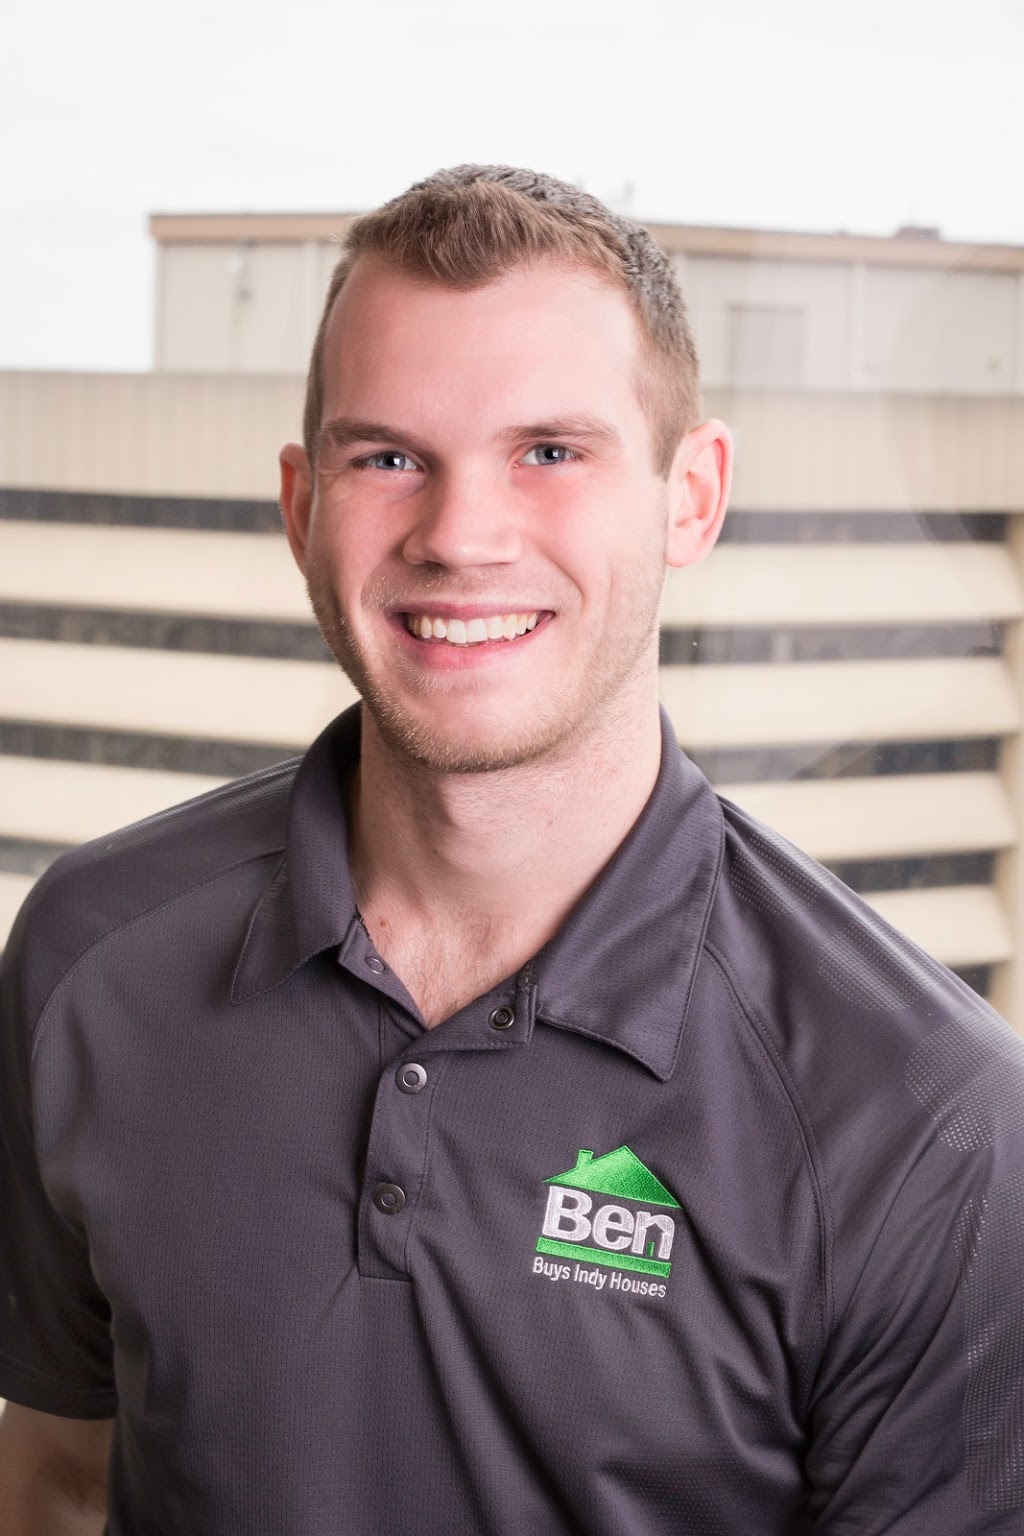 Ben Buys Indy Houses | 1075 Broad Ripple Ave #231, Indianapolis, IN 46220 | Phone: (317) 455-6768